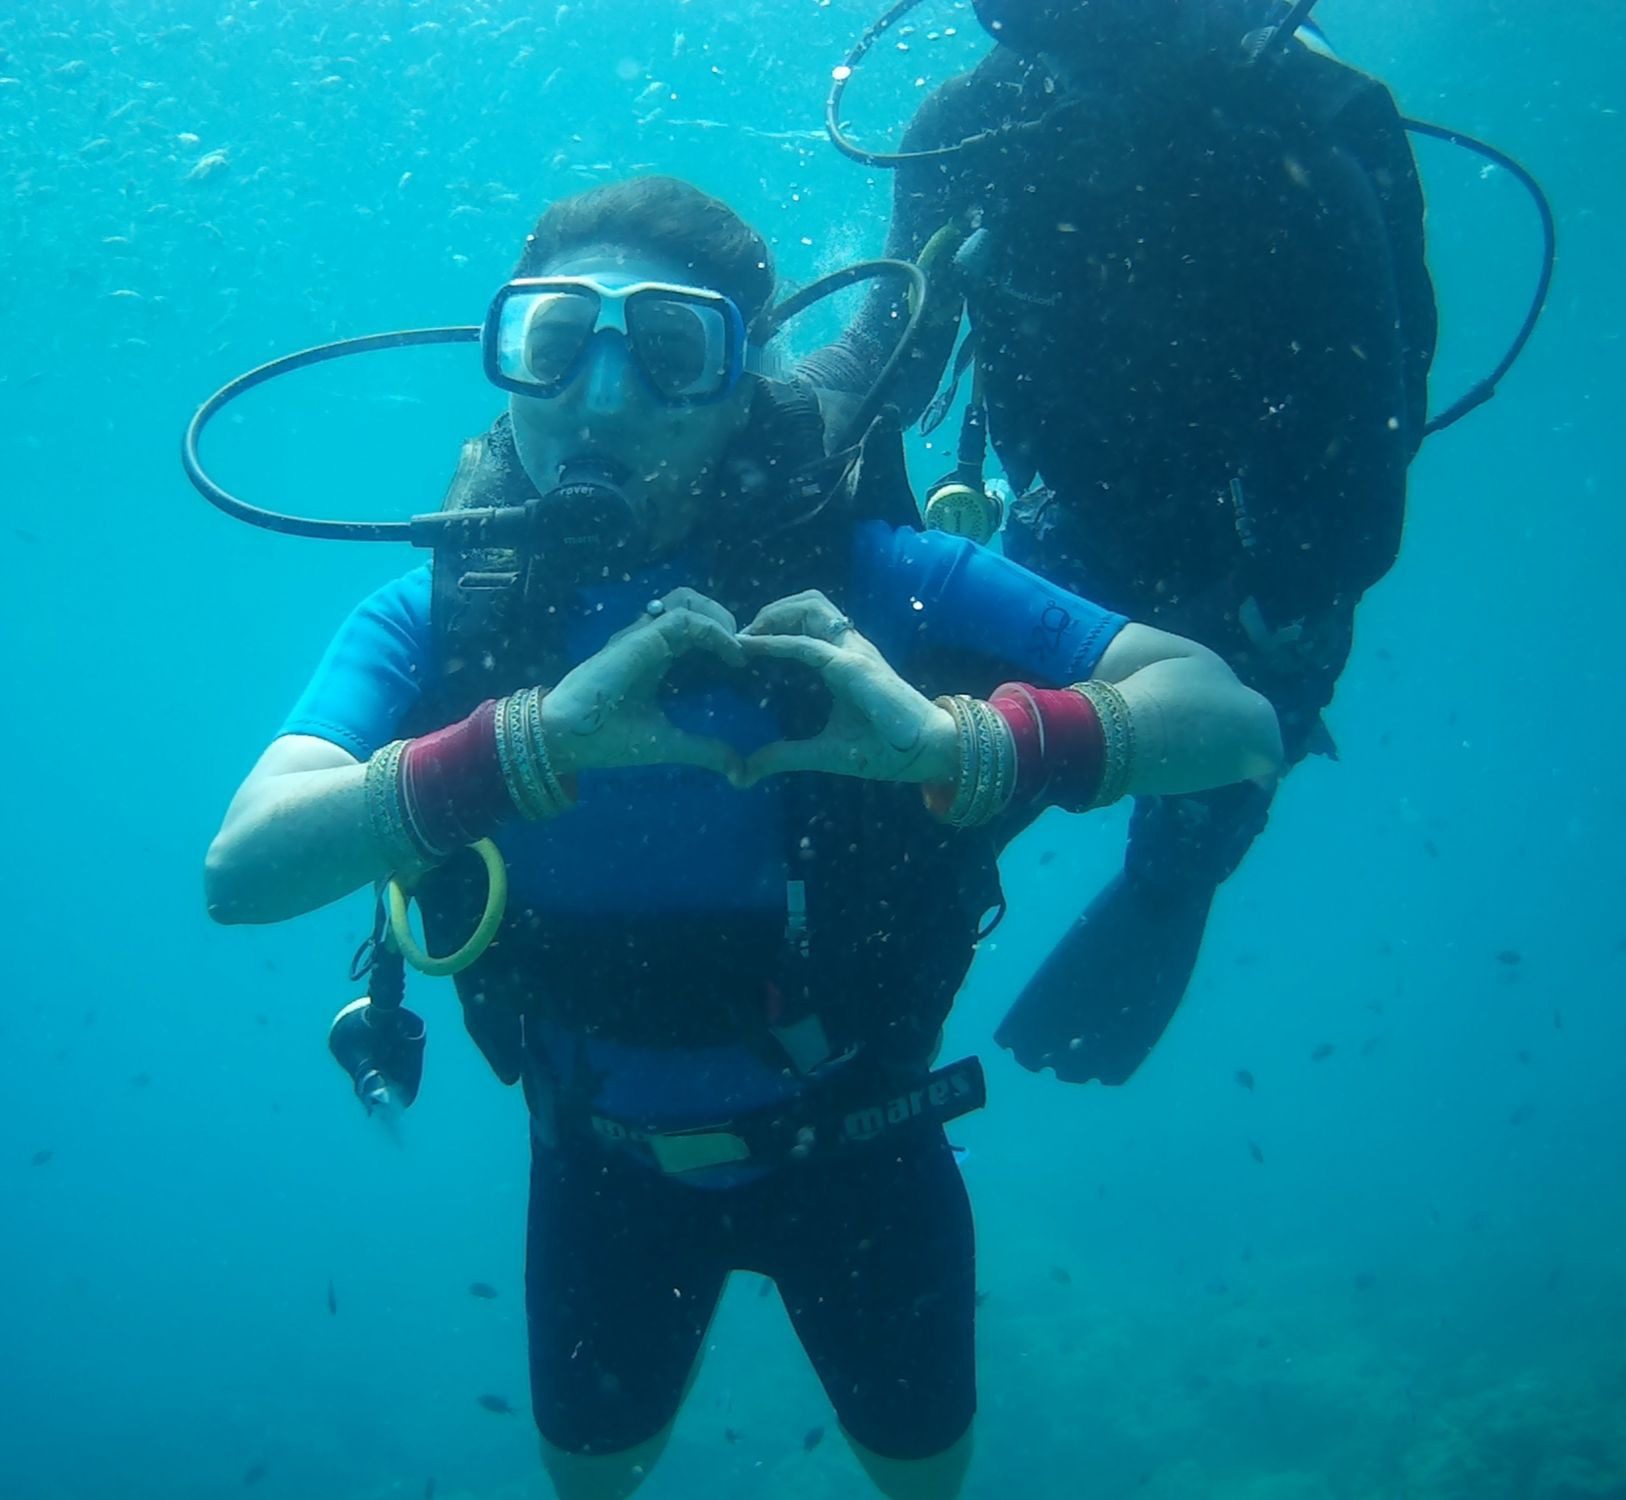 One lady is scuba diving in Andaman